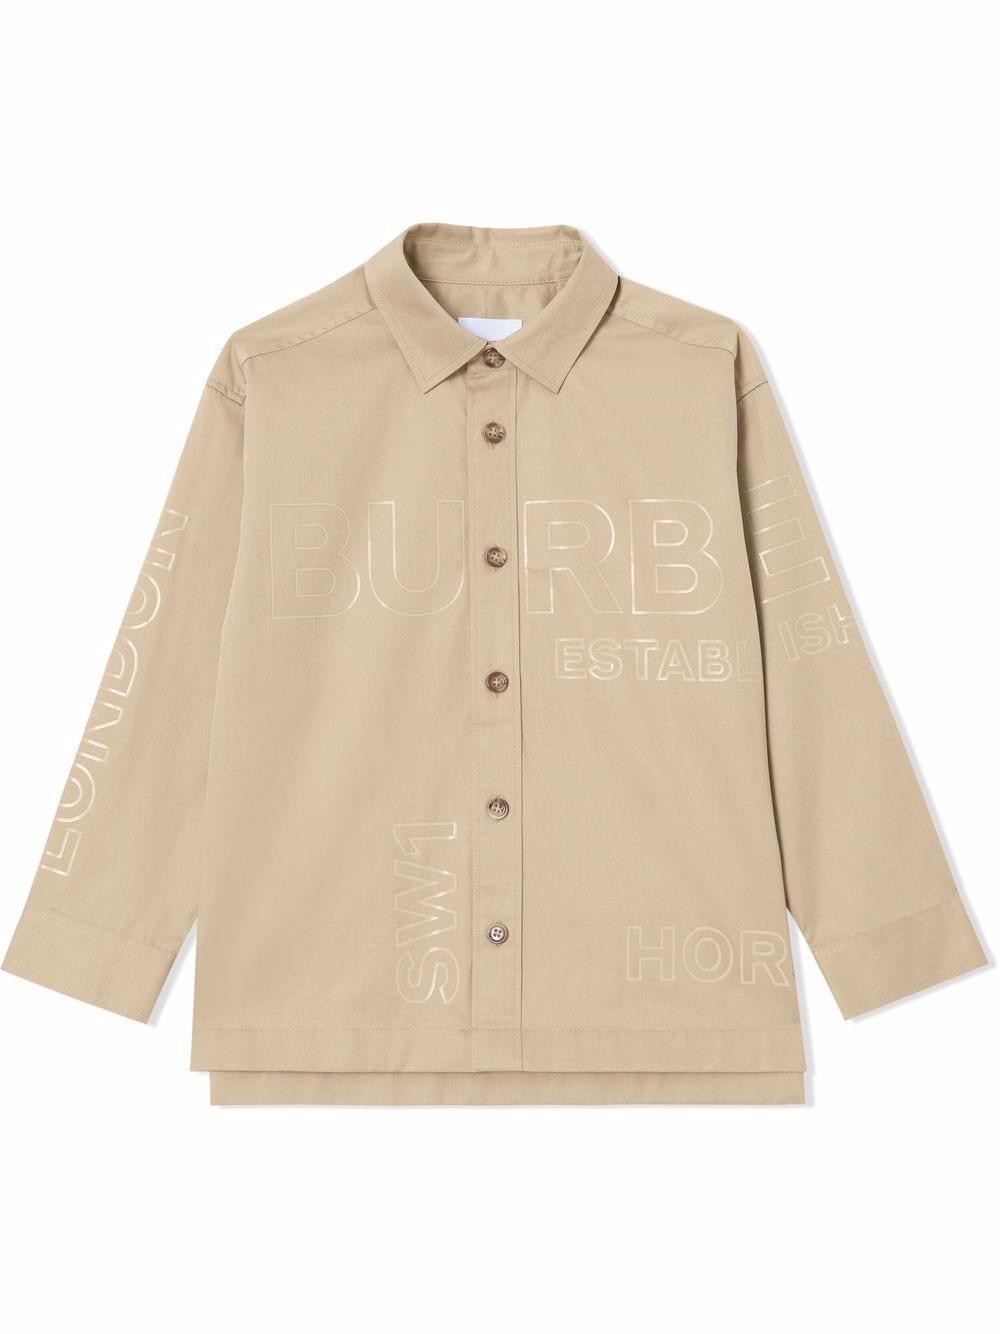 Burberry Kids' Shirt With Tone-on-tone Logo In Beige